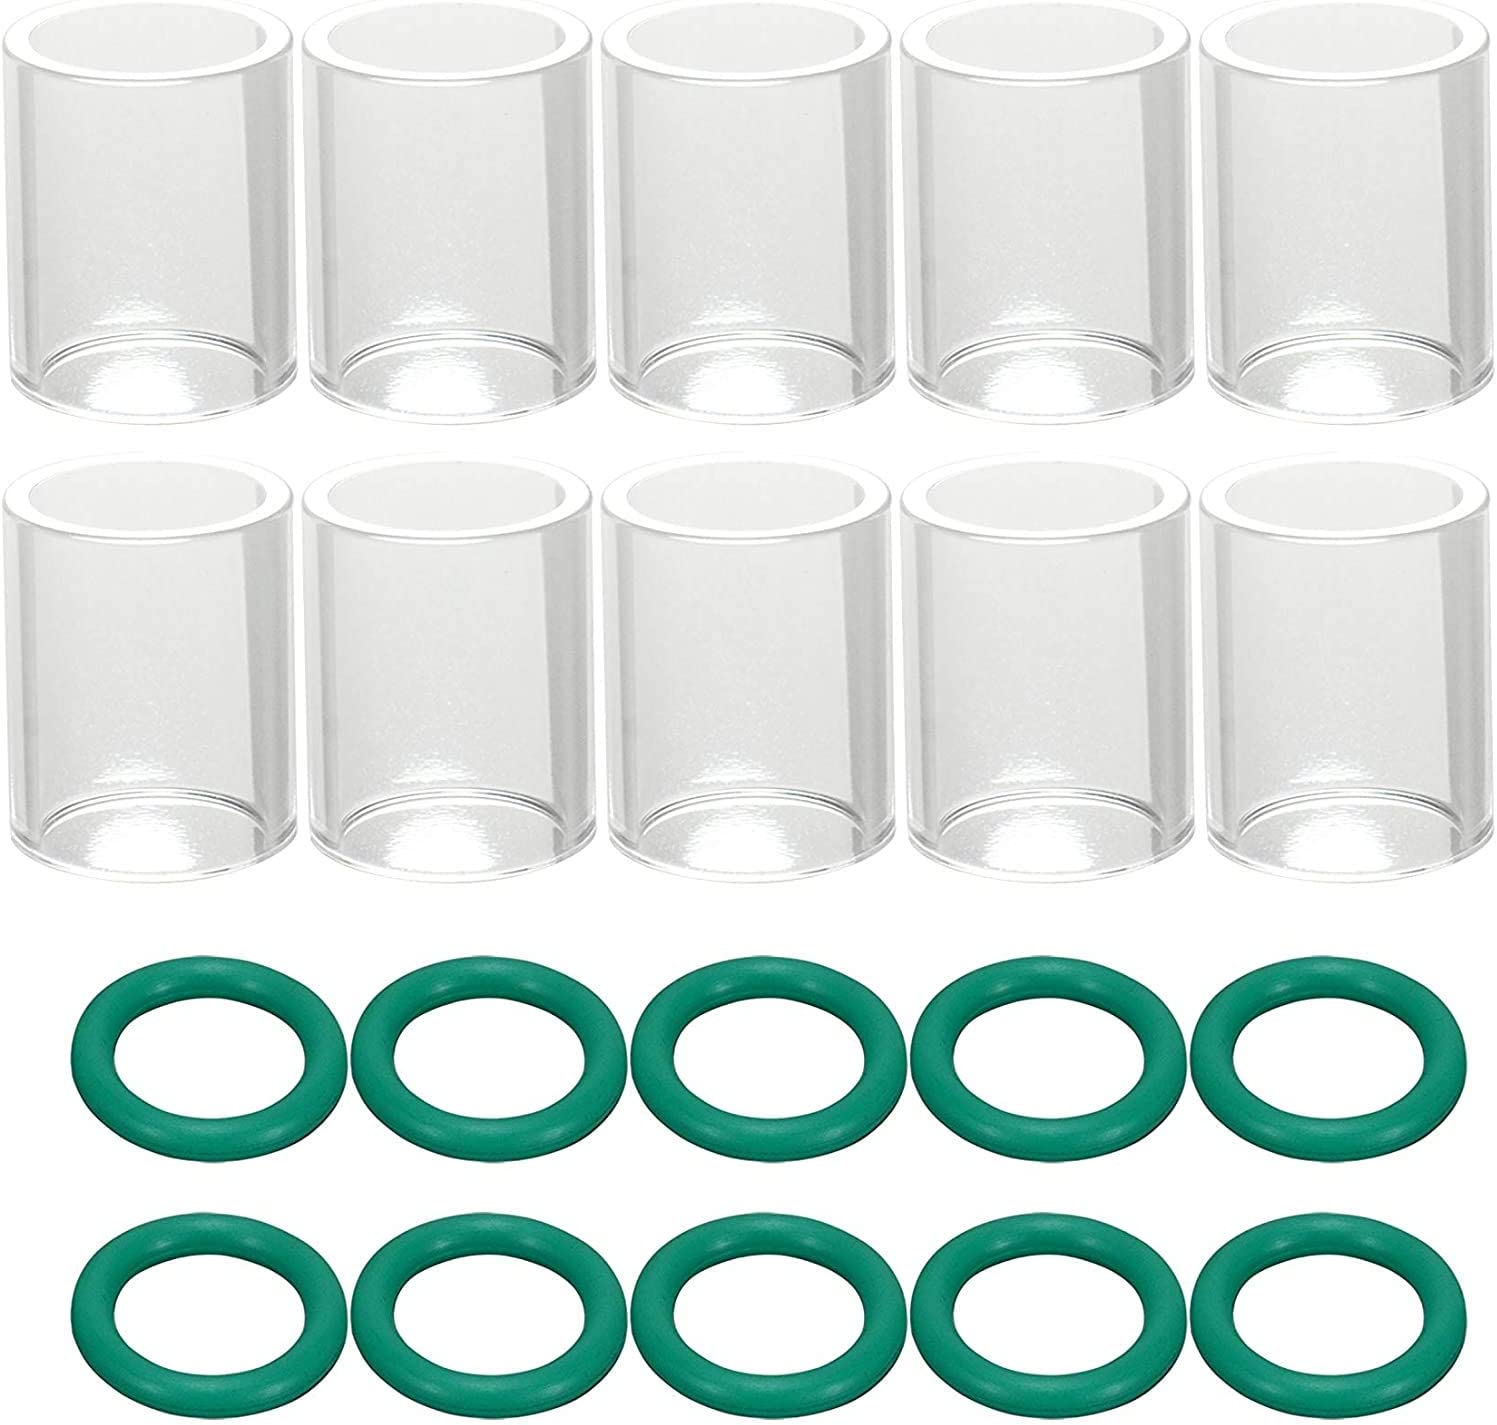 Insulated Glass Cup #10 (5/8" & 16.0mm Orifice) Temperature Resistant O-rings For SR WP 9 17 18 20 25 26 TIG welding torch 20pcs 